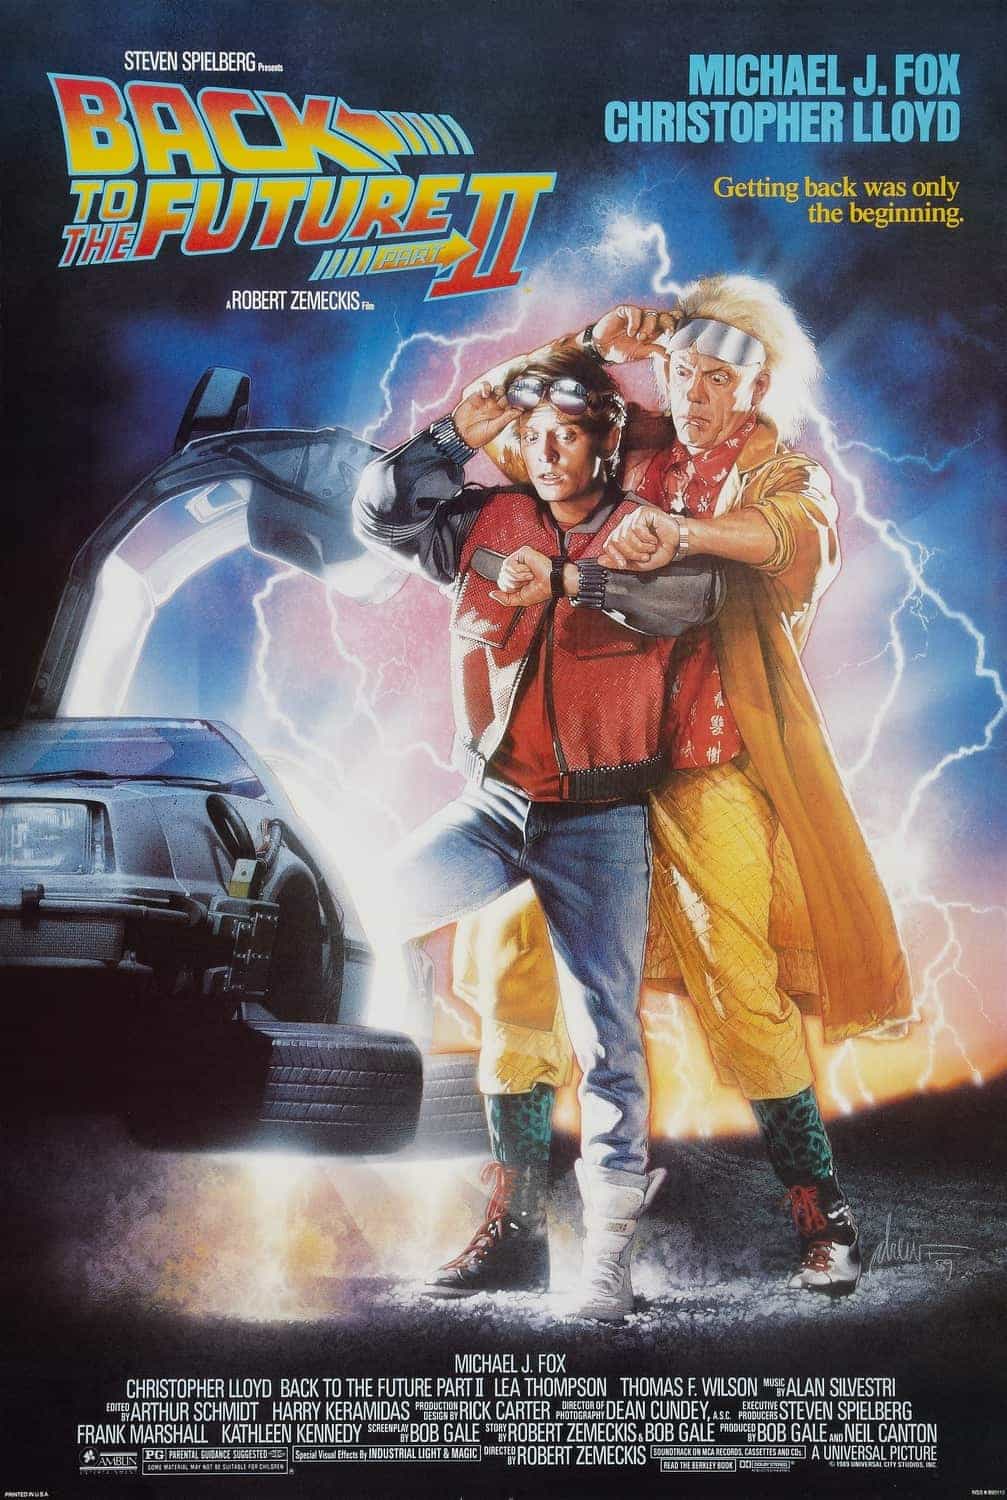 Happy Back to the Future day everyone, the future has officially arrived